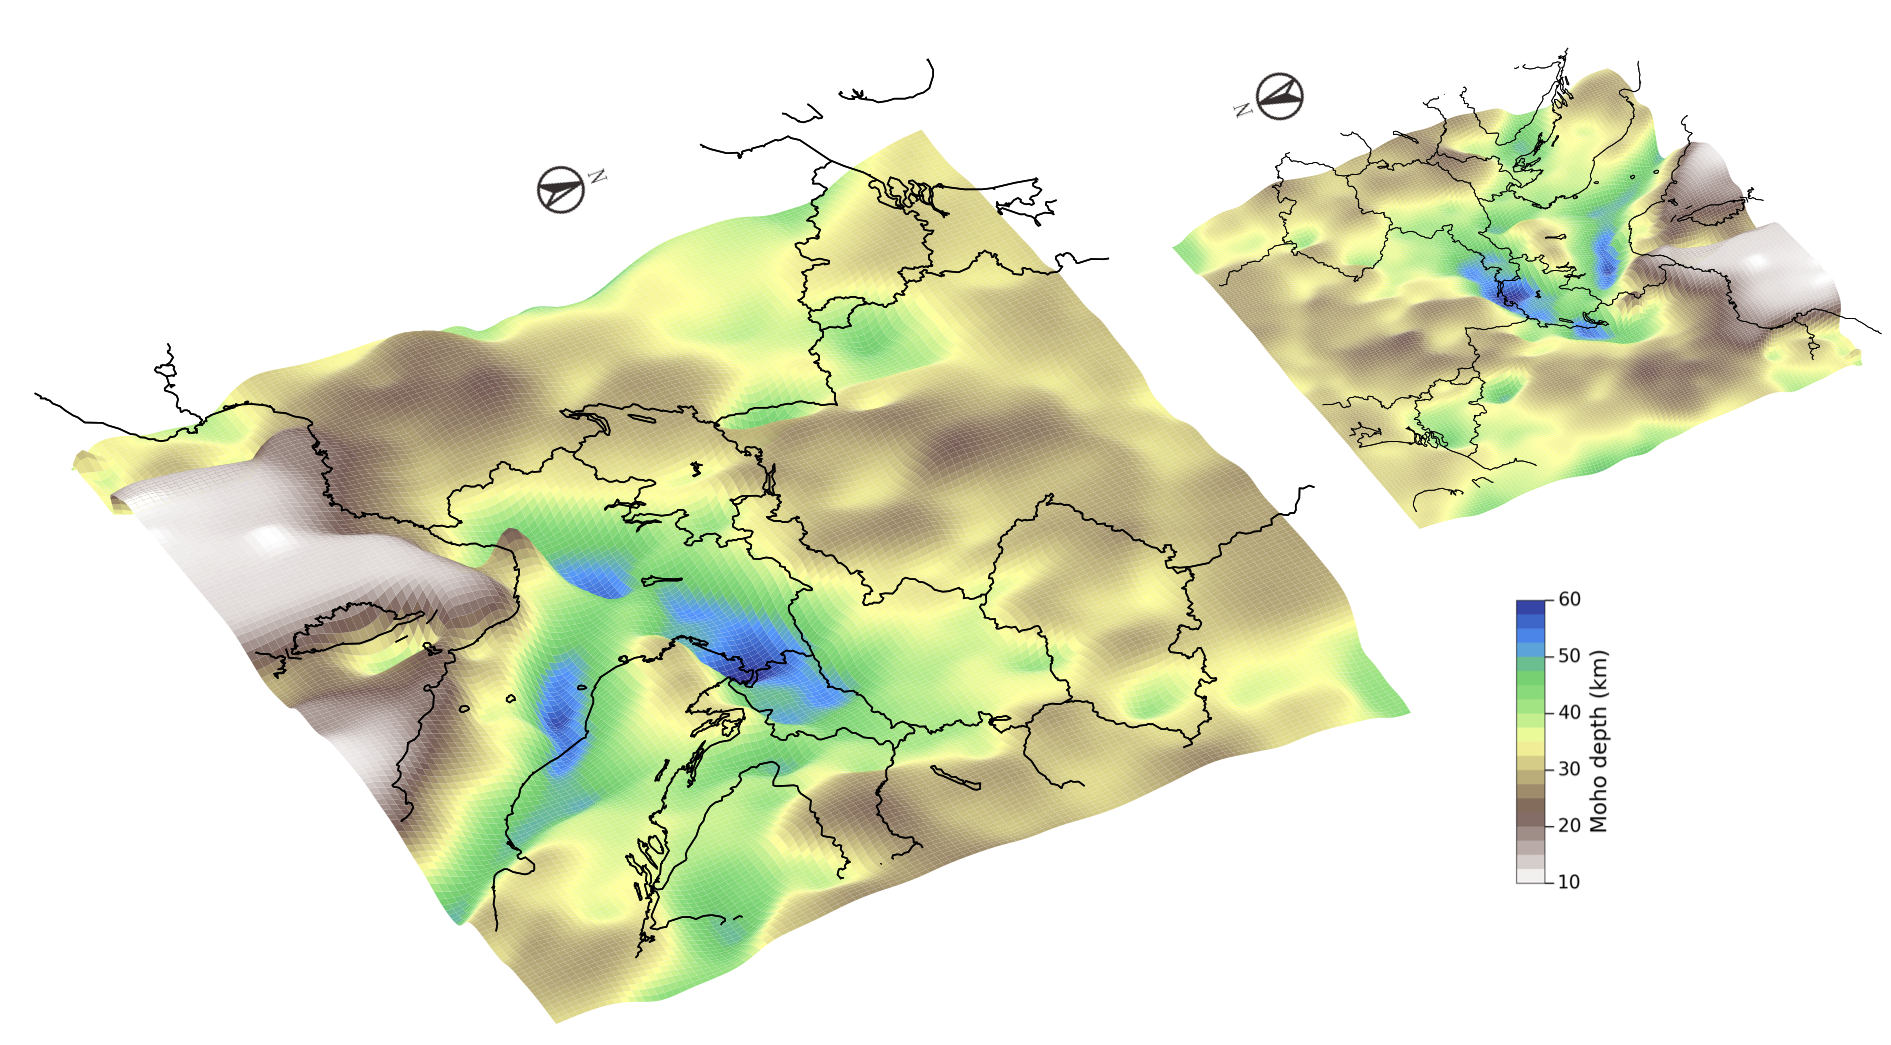 3-D views of the Bayesian Moho depth map